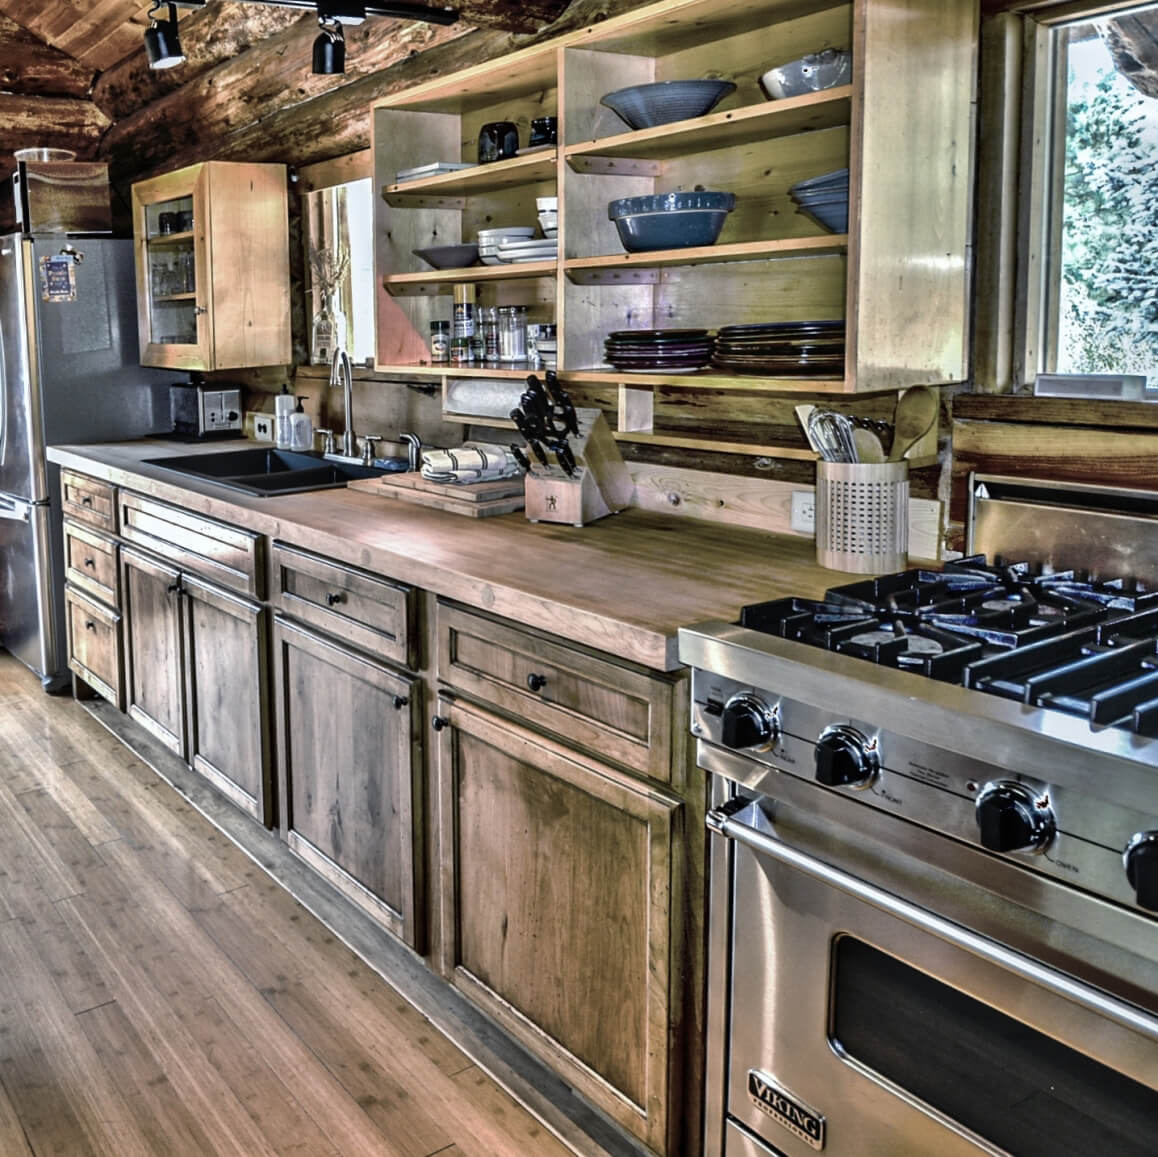 A rustic old-sdtyled kitchen with HIckory cabinets.